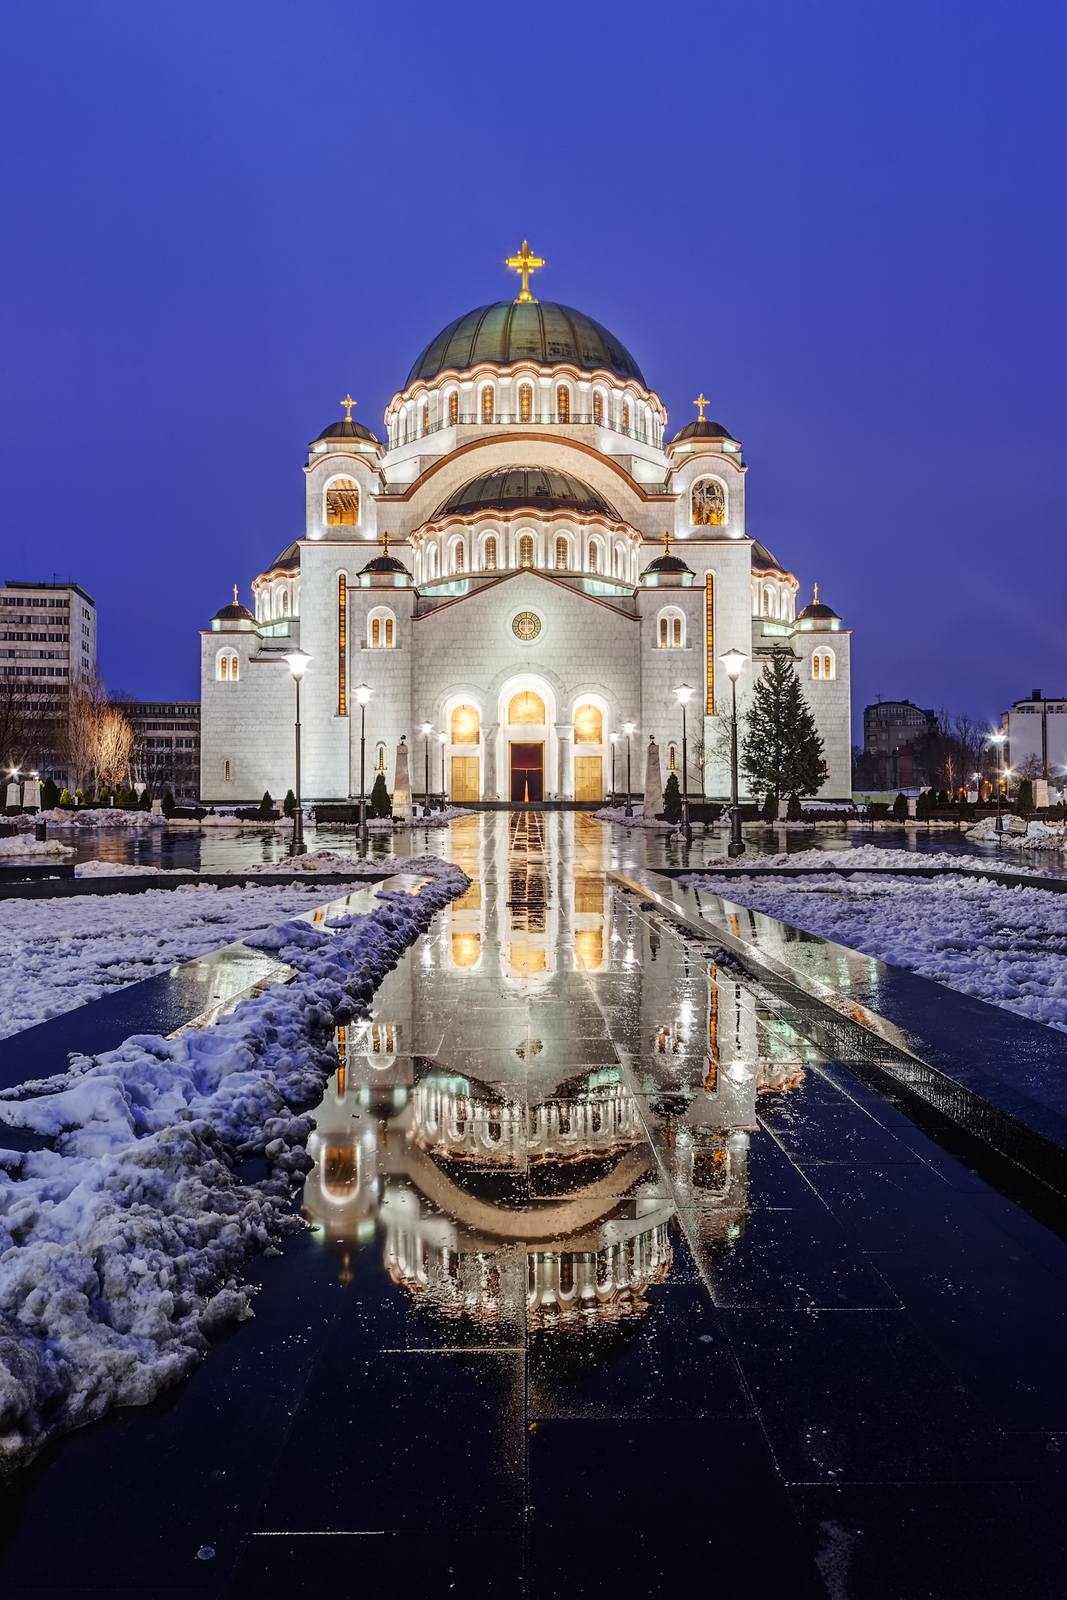 Saint Sava temple - things to see in belgrade